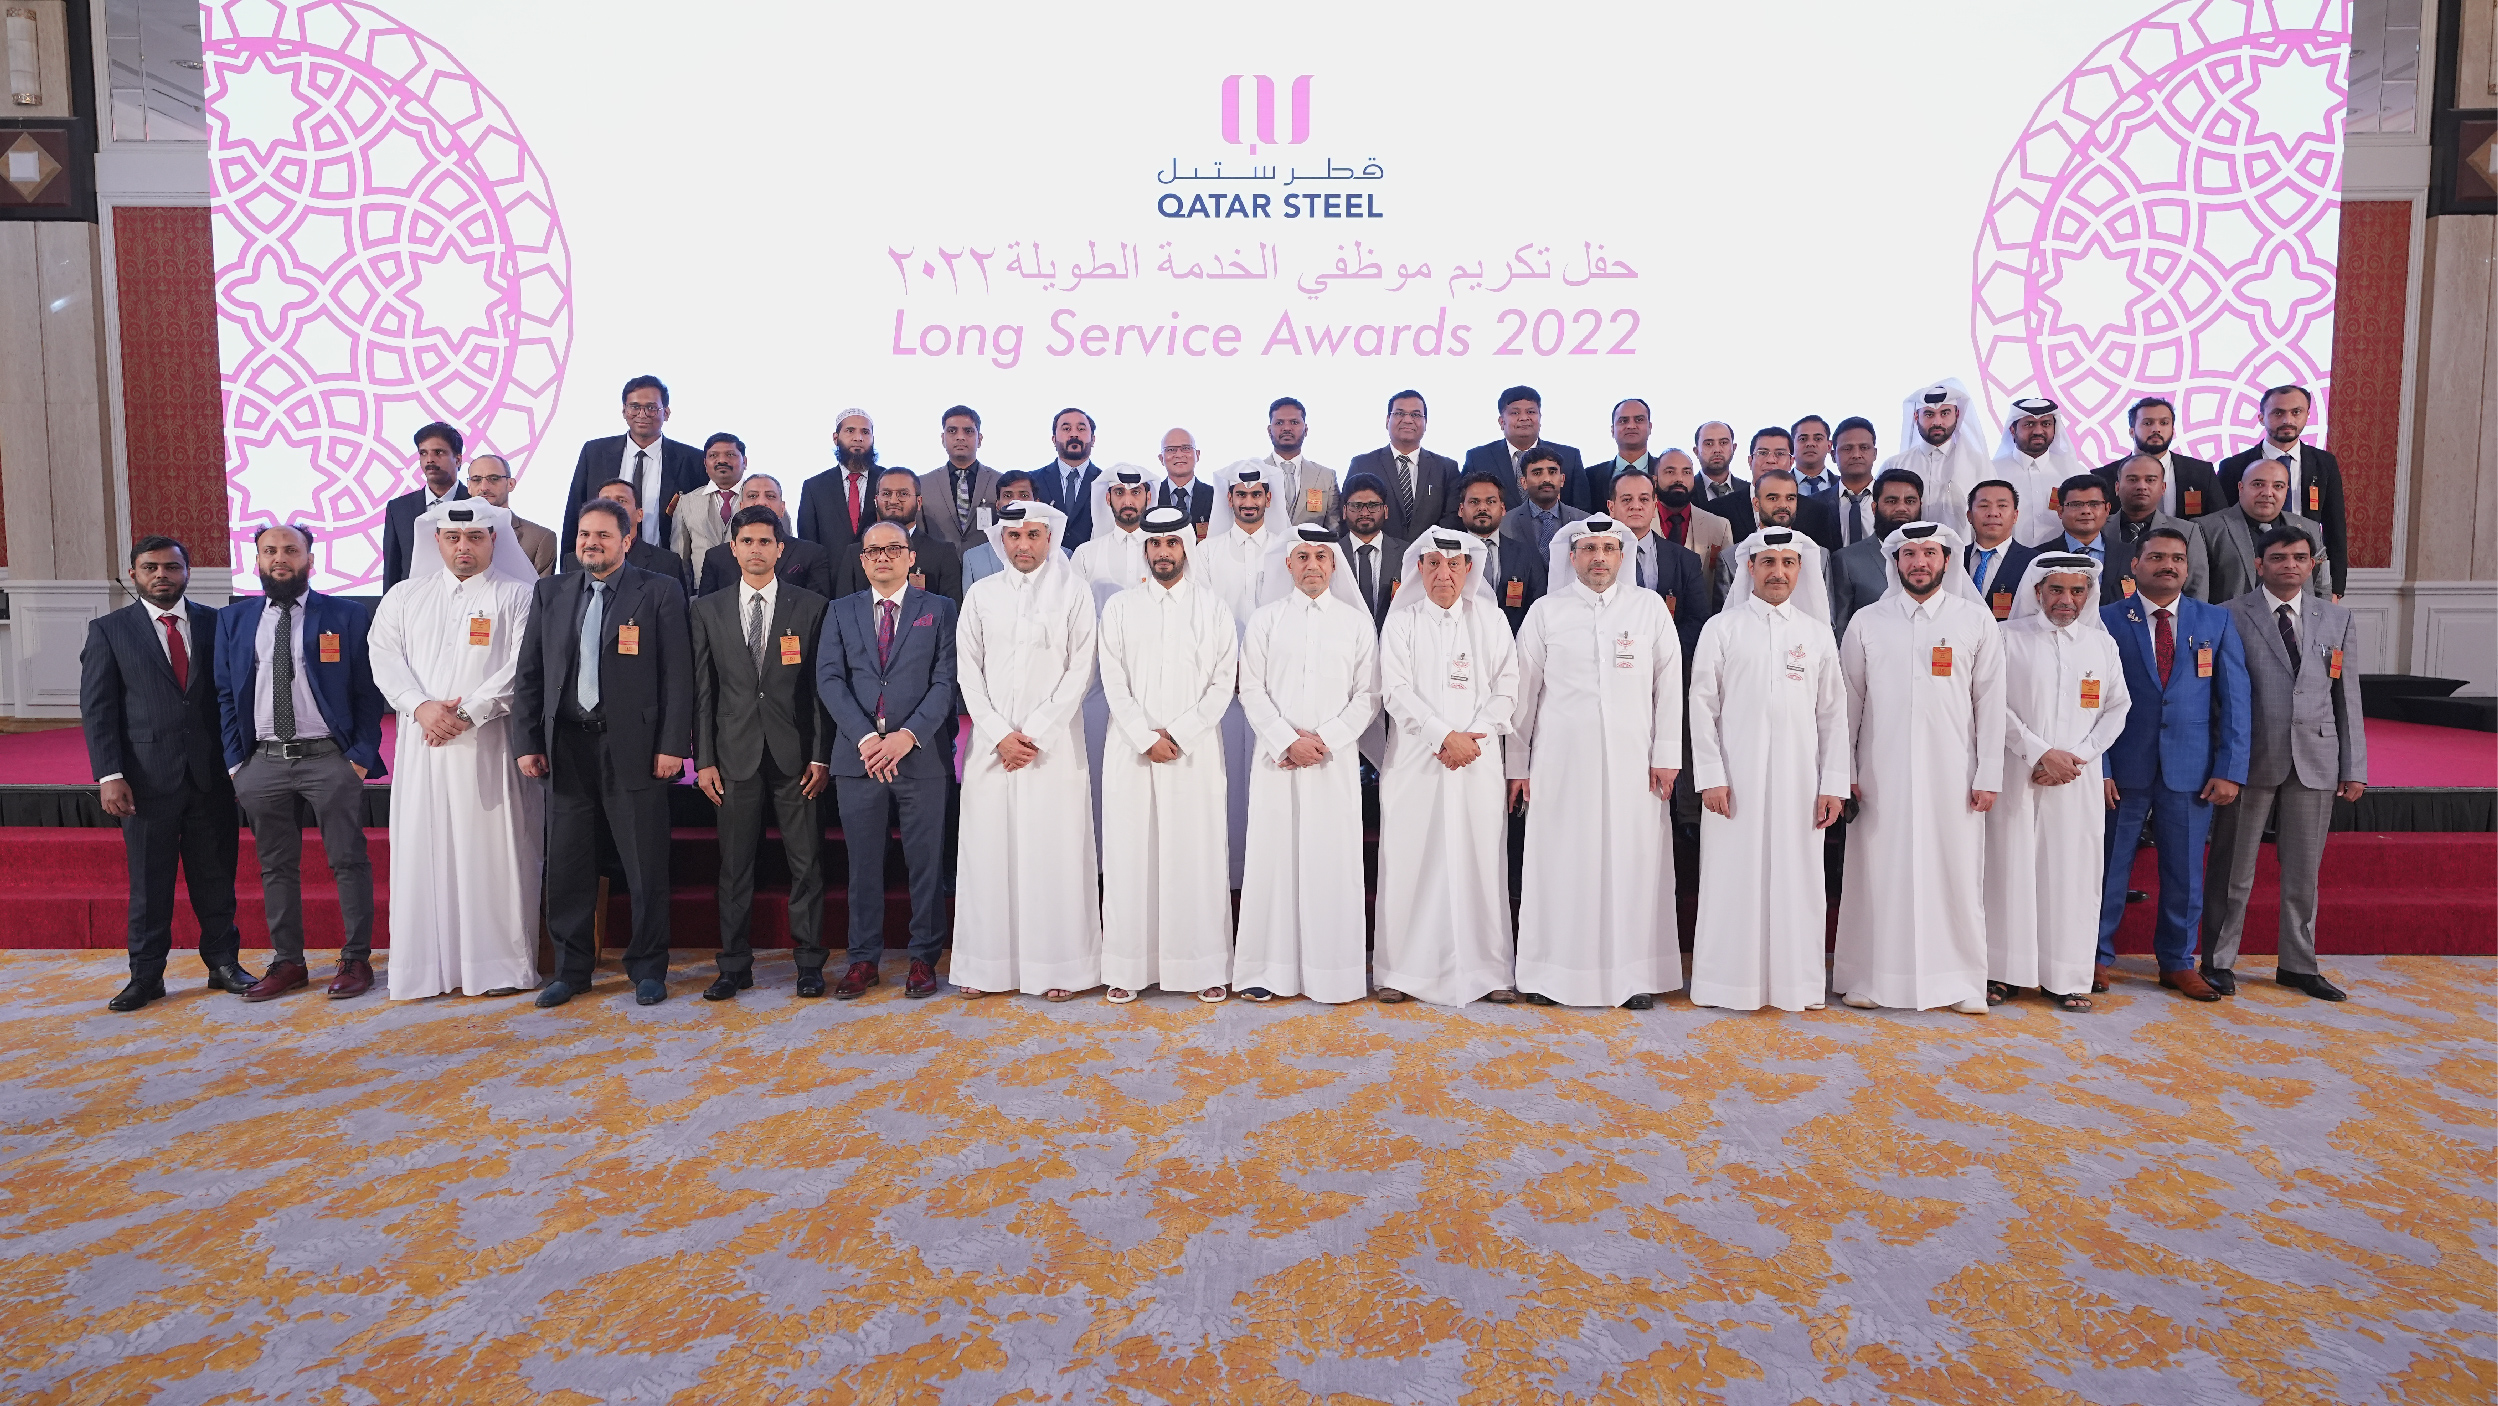 Qatar Steel celebrates loyalty of 162 employees at Long Service Awards Ceremony.